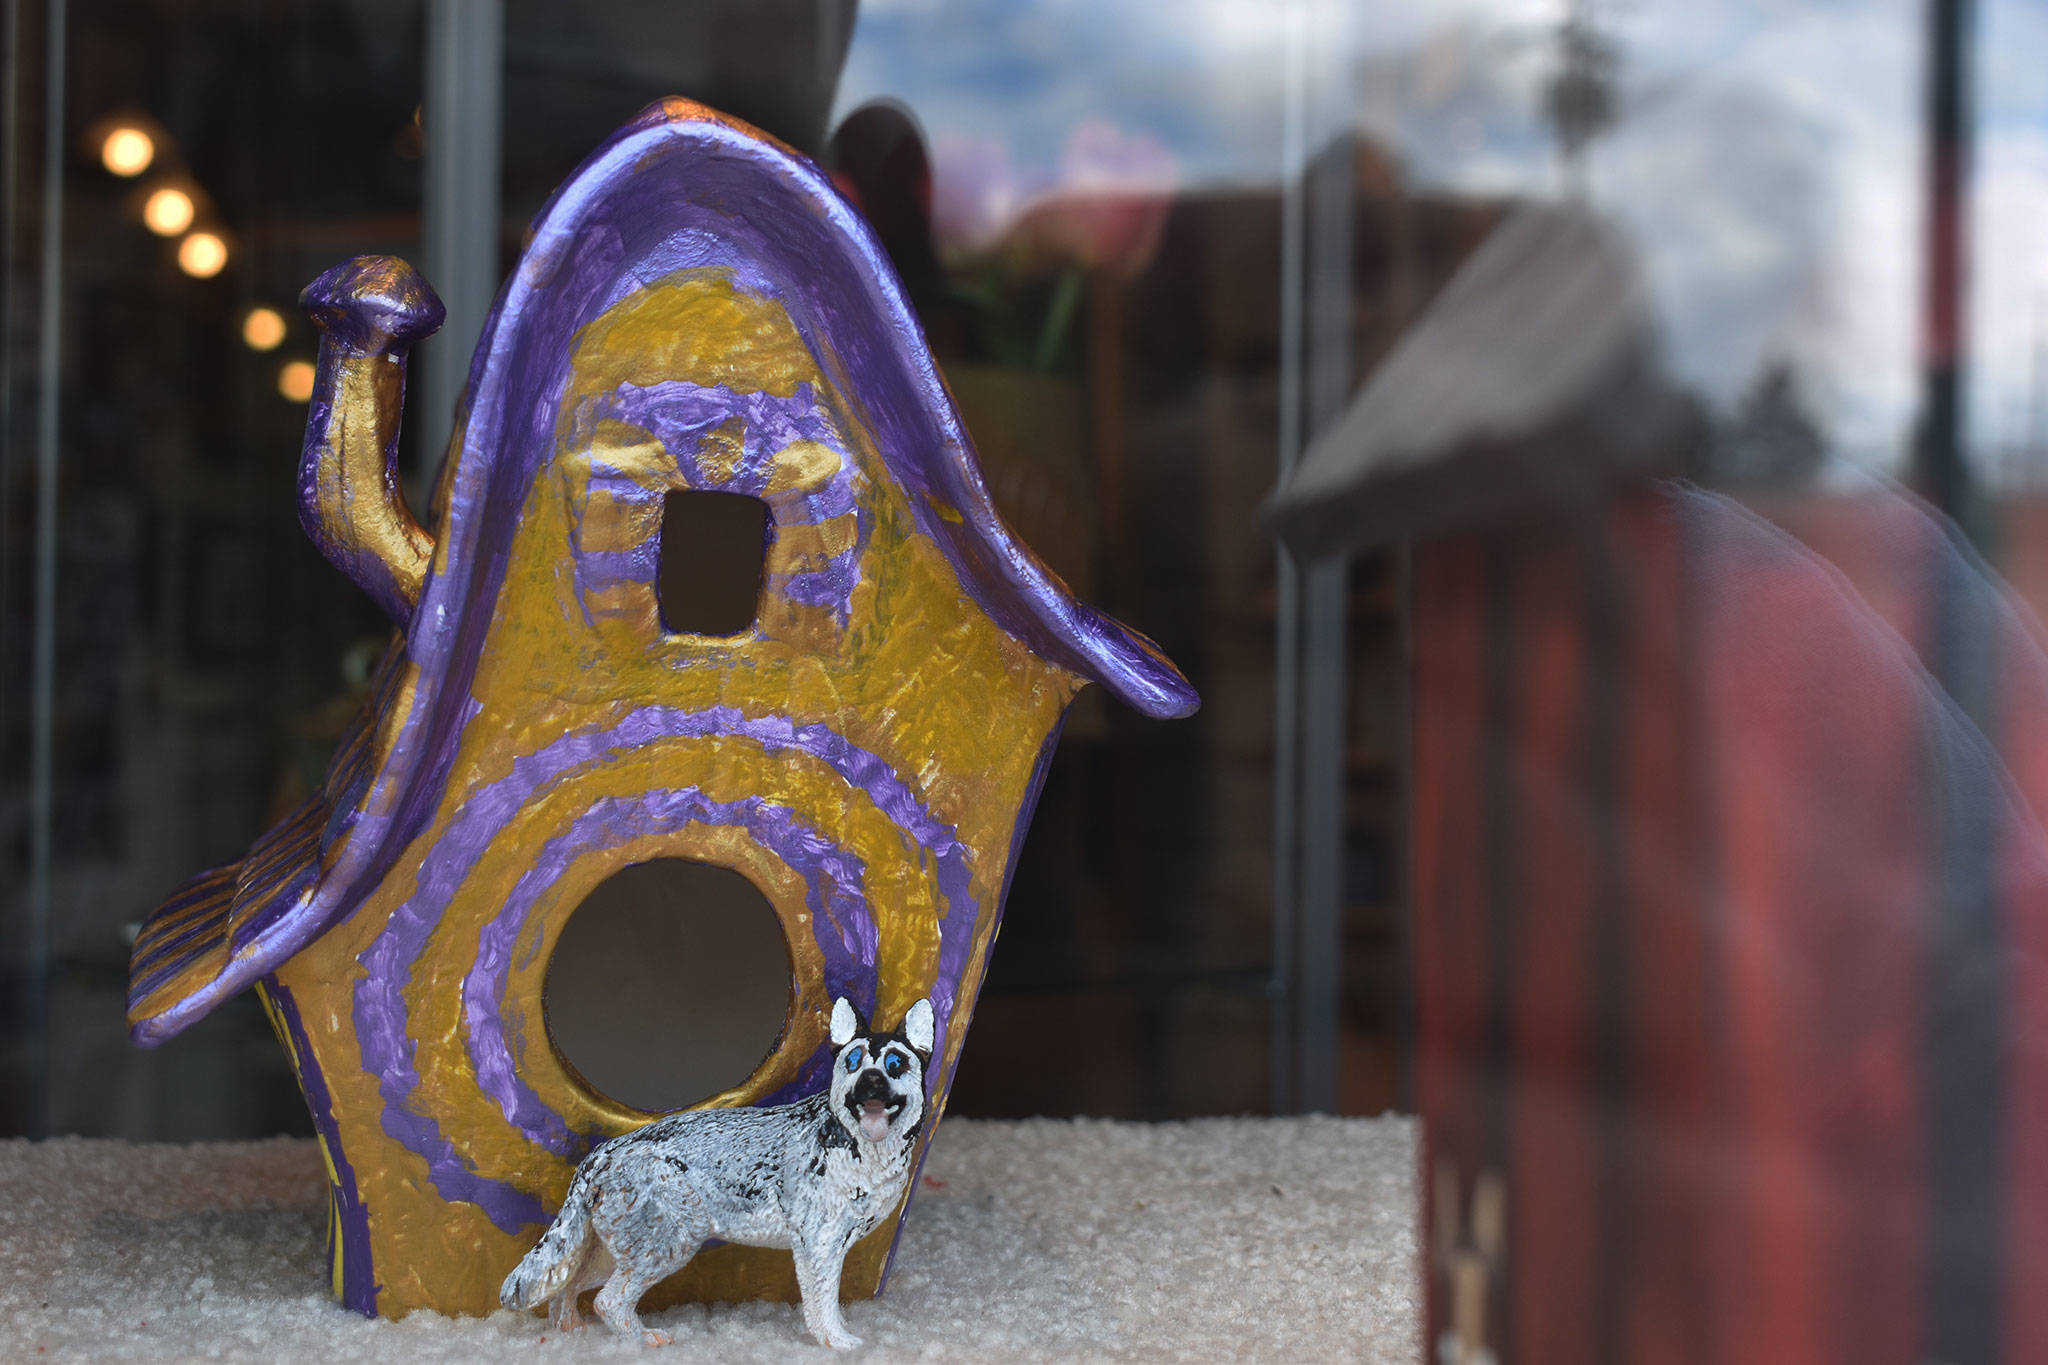 A University of Washington-themed birdhouse, complete with a husky, is one of several birdhouses available at Arts Alive’s silent auction.